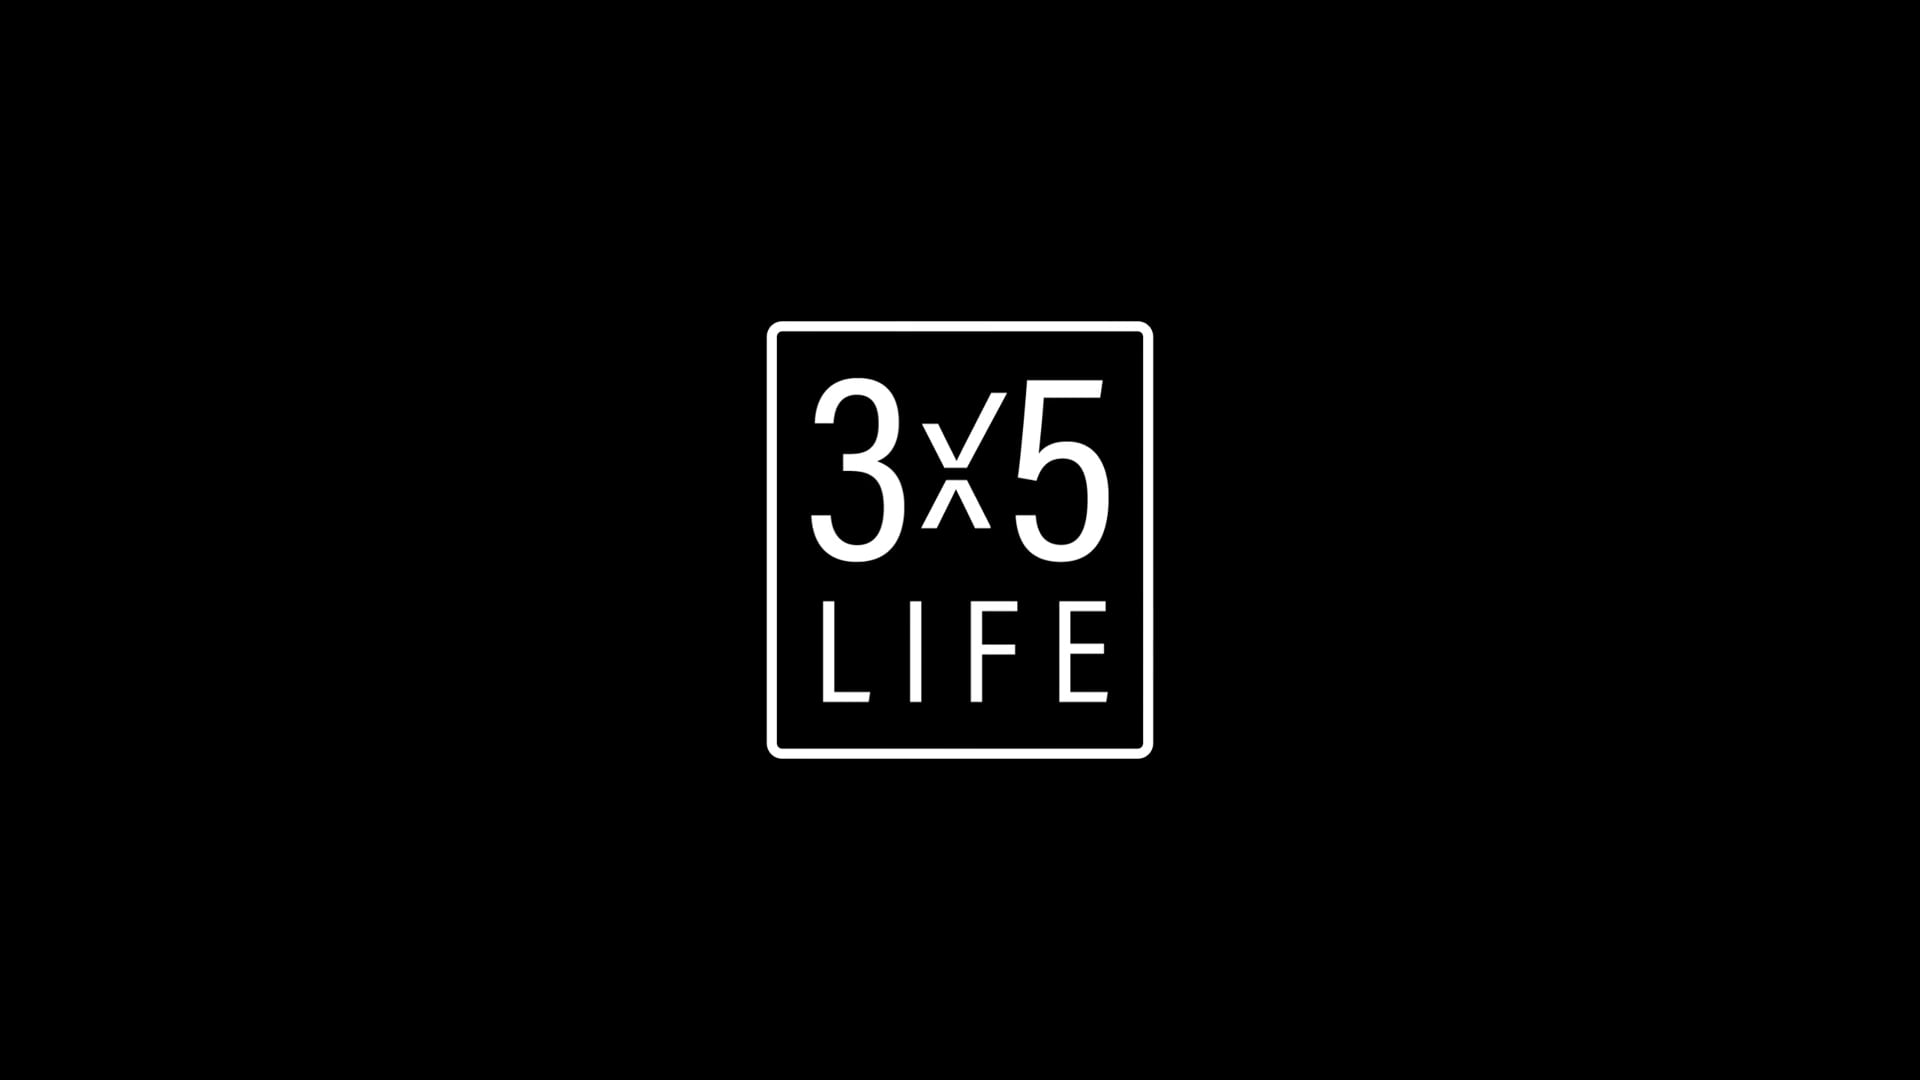 3x5 Life - Day in the Life